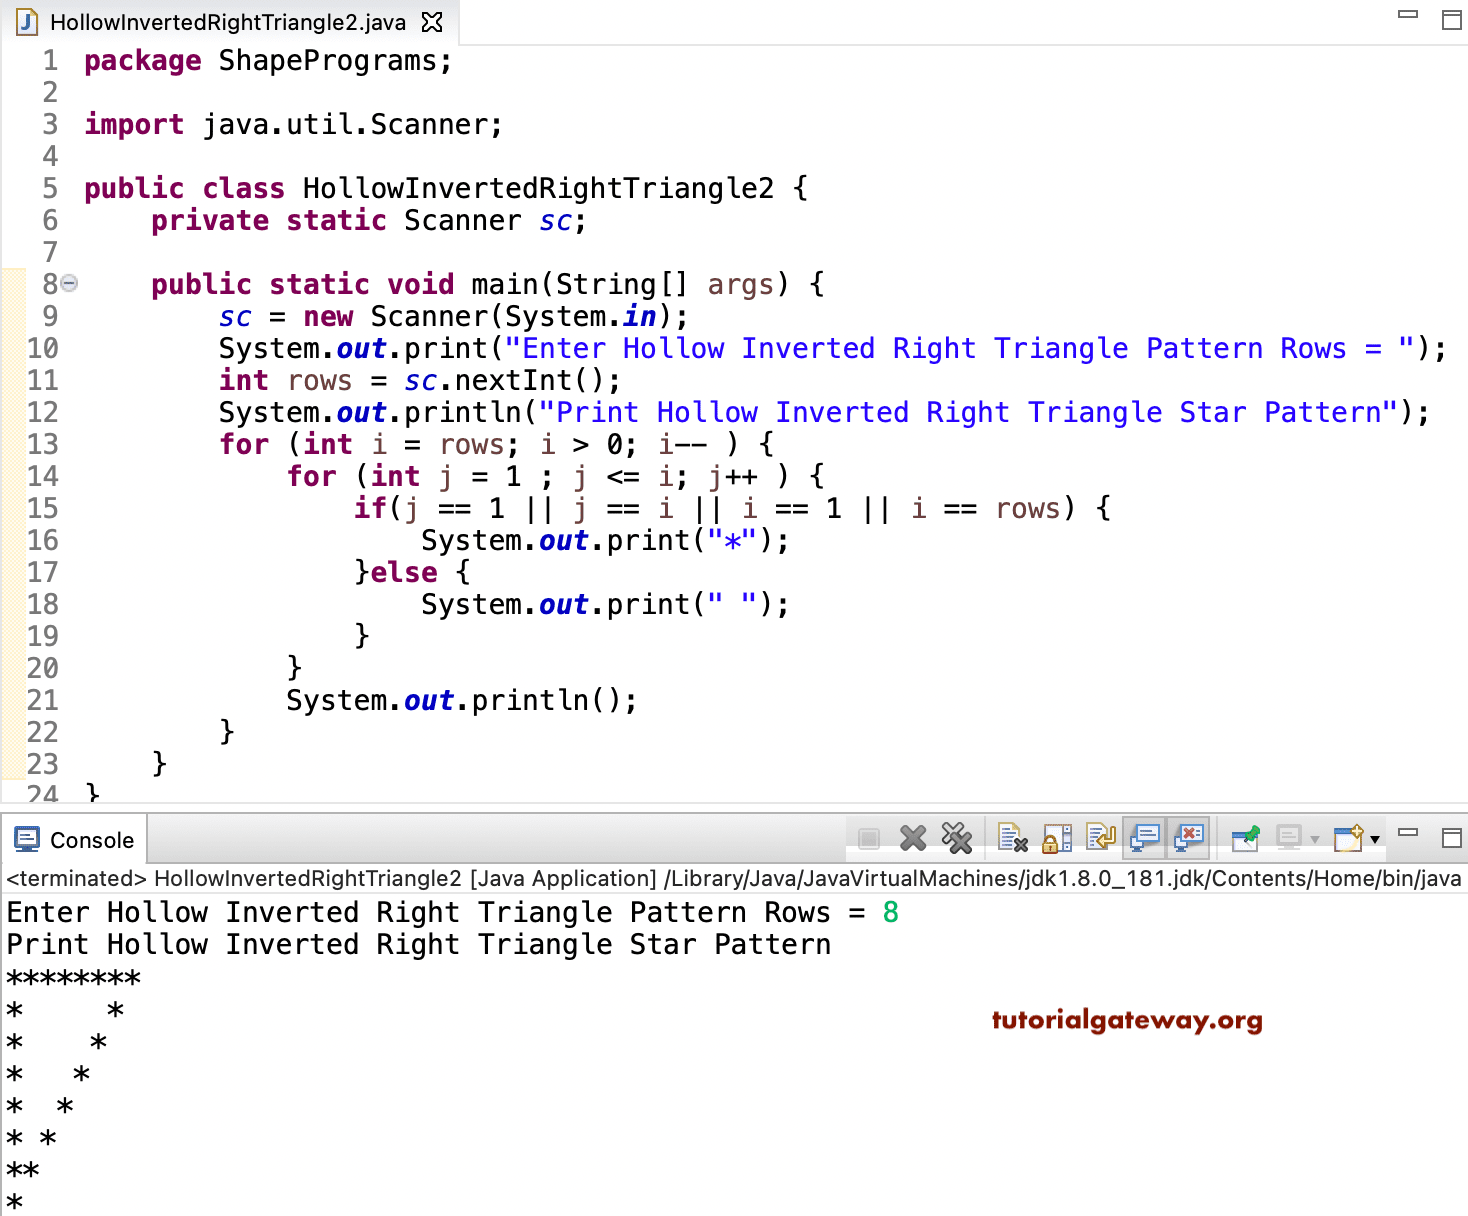 Java Program to Print Hollow Inverted Right Triangle Star Pattern 1